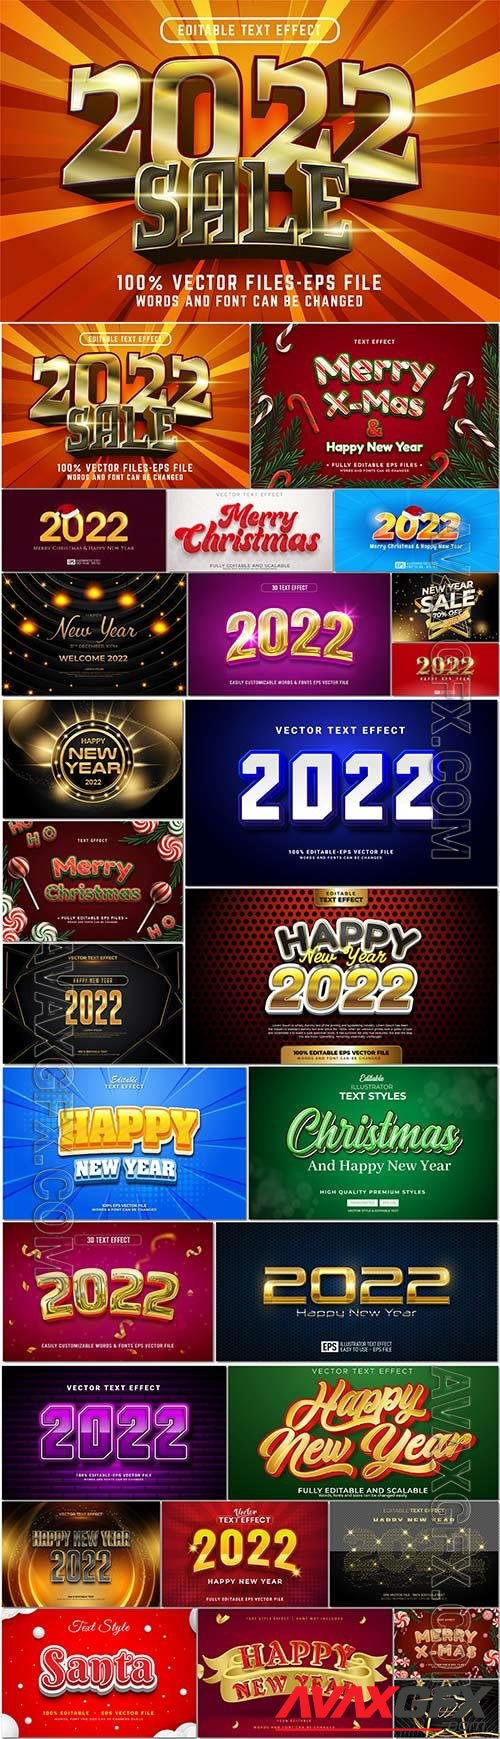 Happy new year, christmas, 2022 3d text editable style effect vector template set